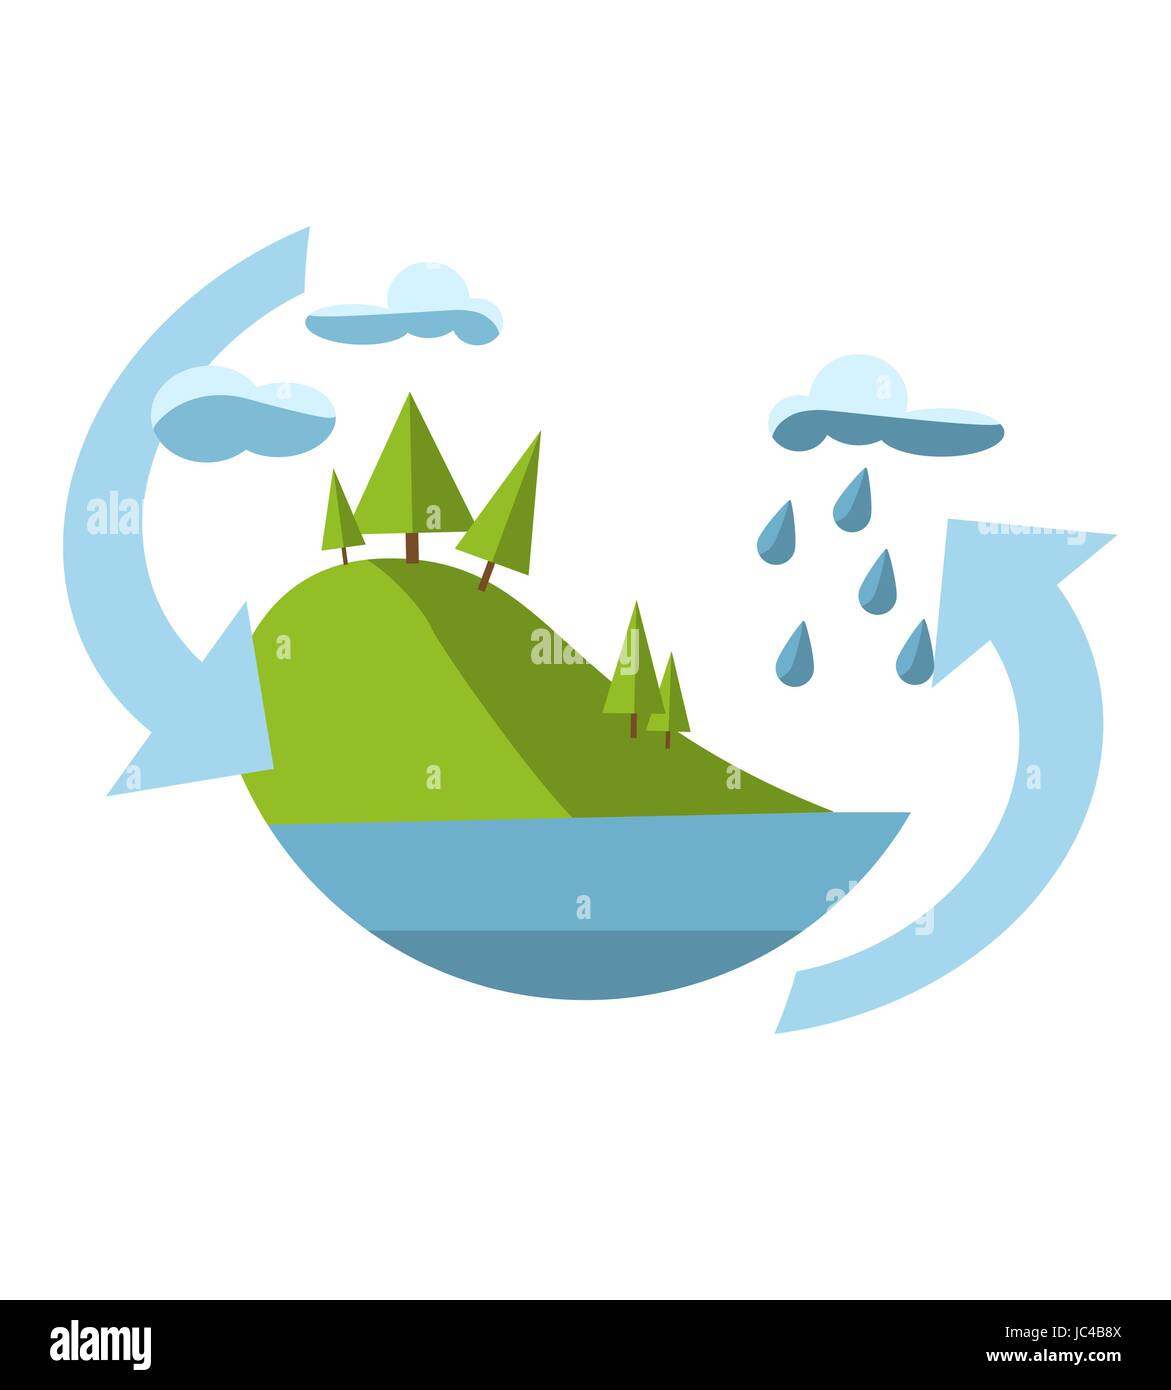 concept illustration with icon of environment  Stock Vector